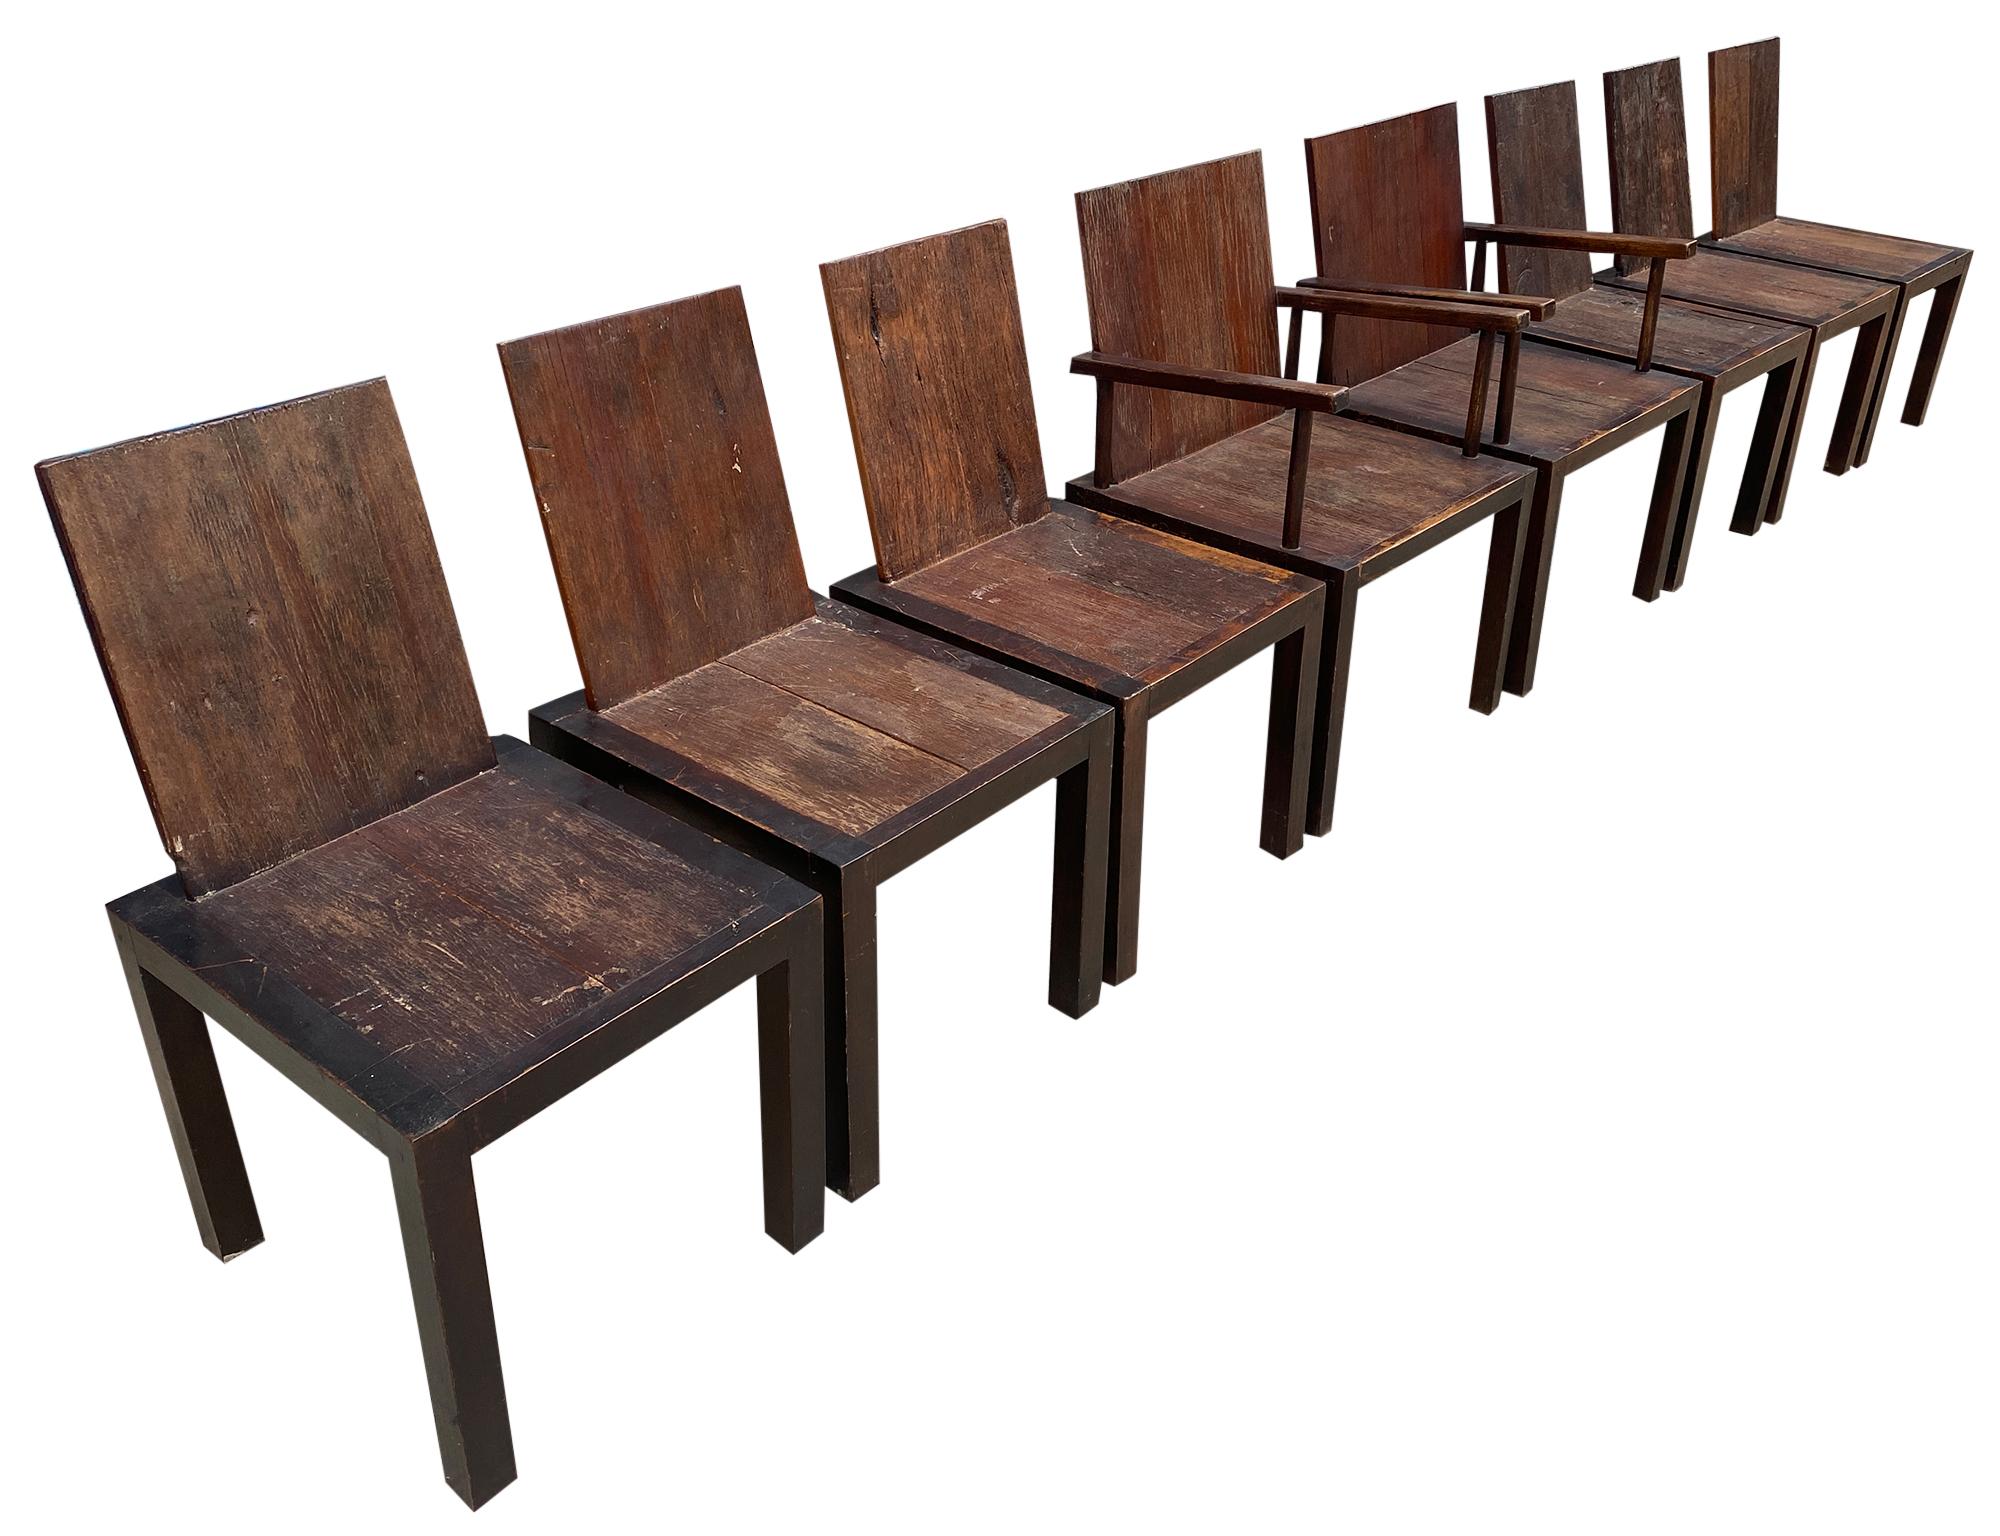 Set of 8 Modern rustic organic dining chairs style of Nakashima solid wood with butterfly details. Simple studio craft designed wood chairs in used vintage condition show signs of wear and use. Live wood textured seats with butterfly details on back